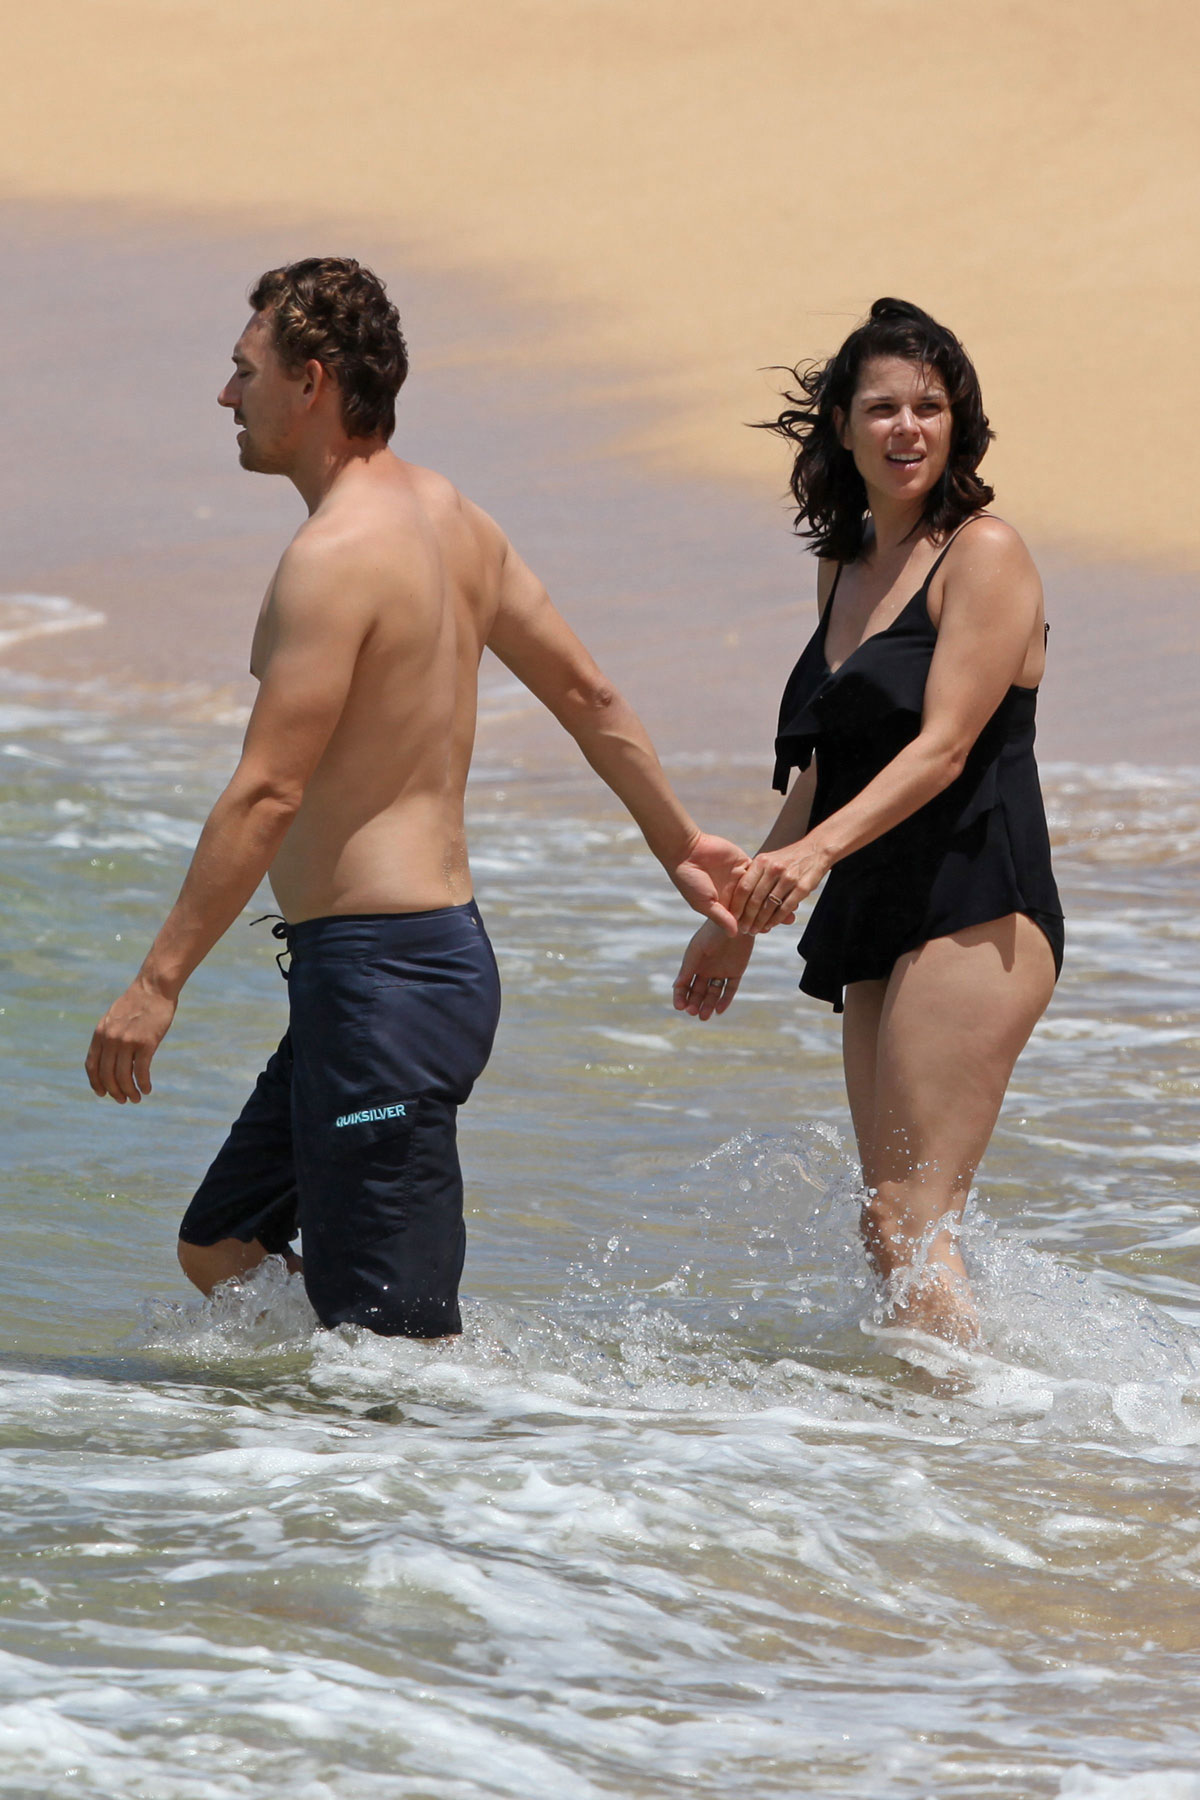 NEVE CAMPBELL in Swimsuit at Beach in Hawaii.